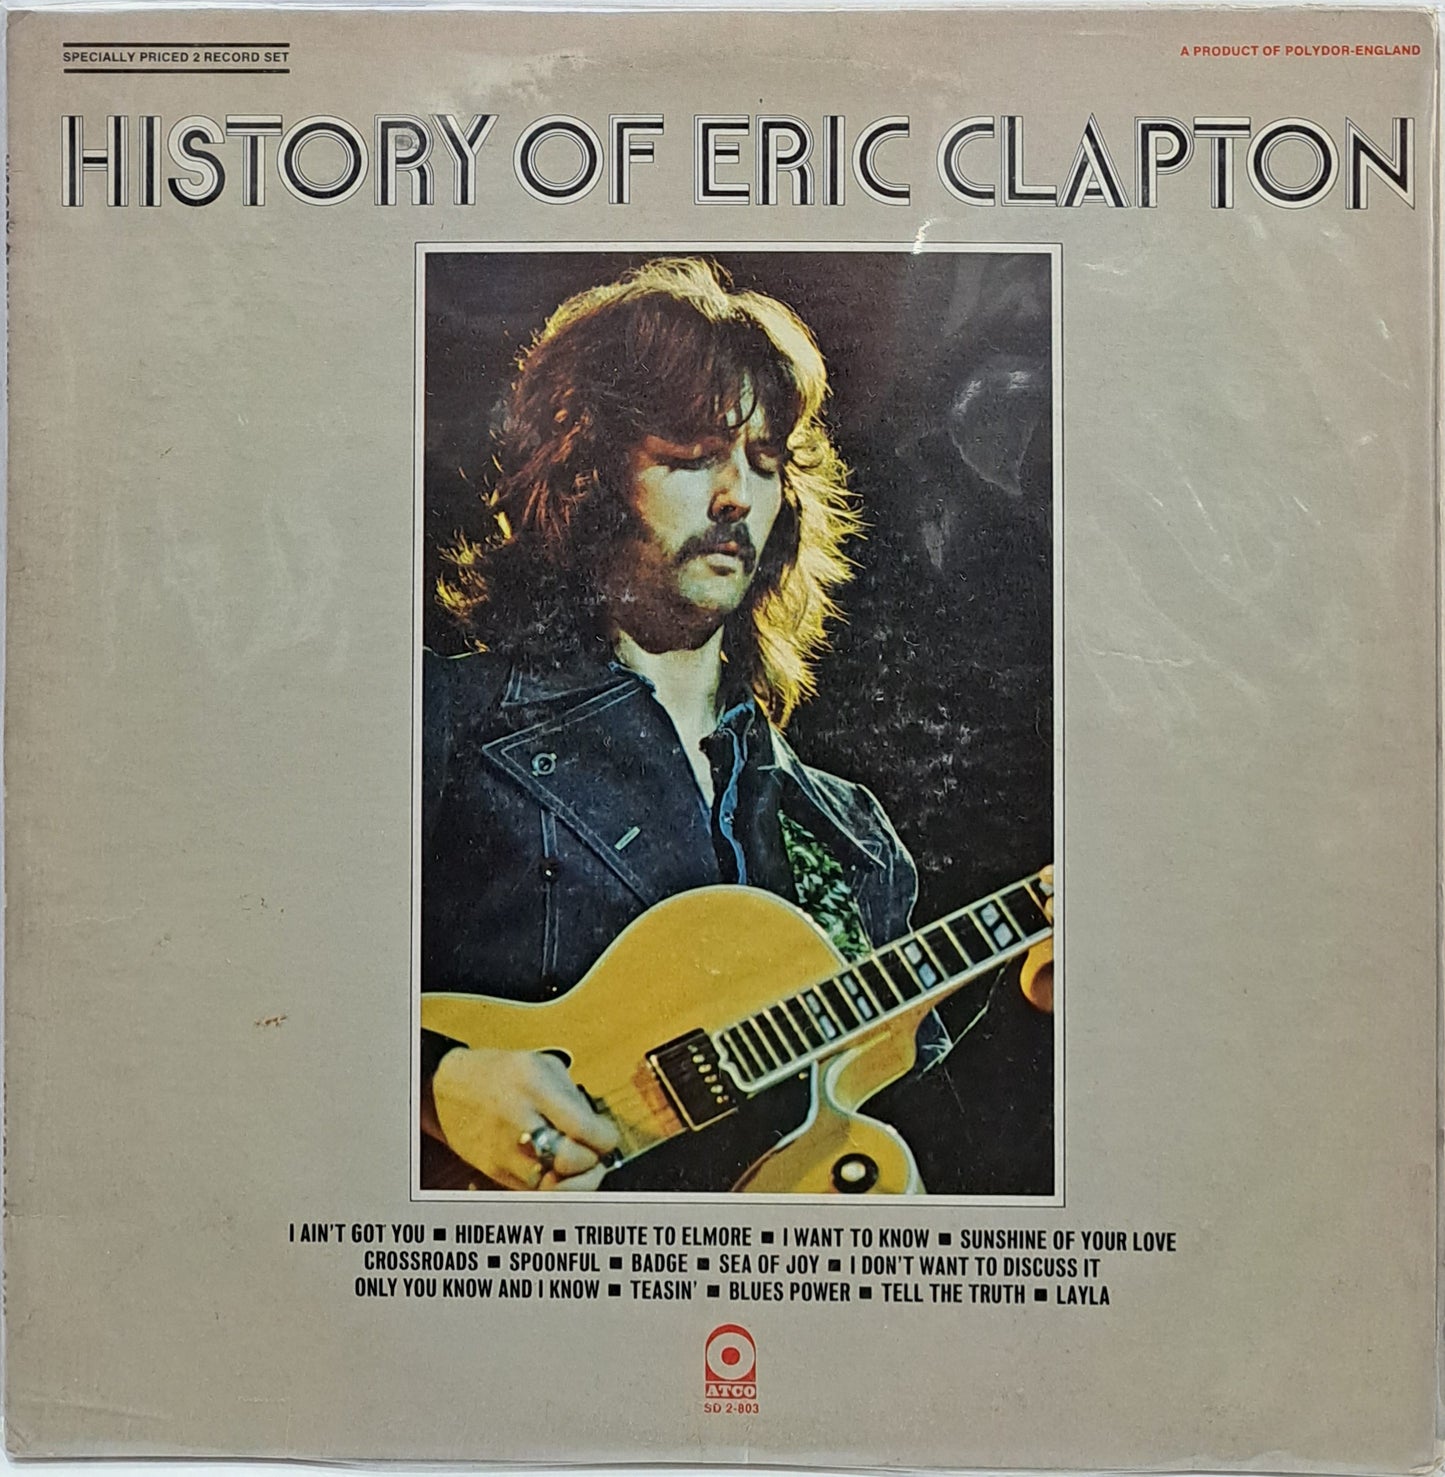 ERIC CLAPTON - HISTORY OF 2 LPS